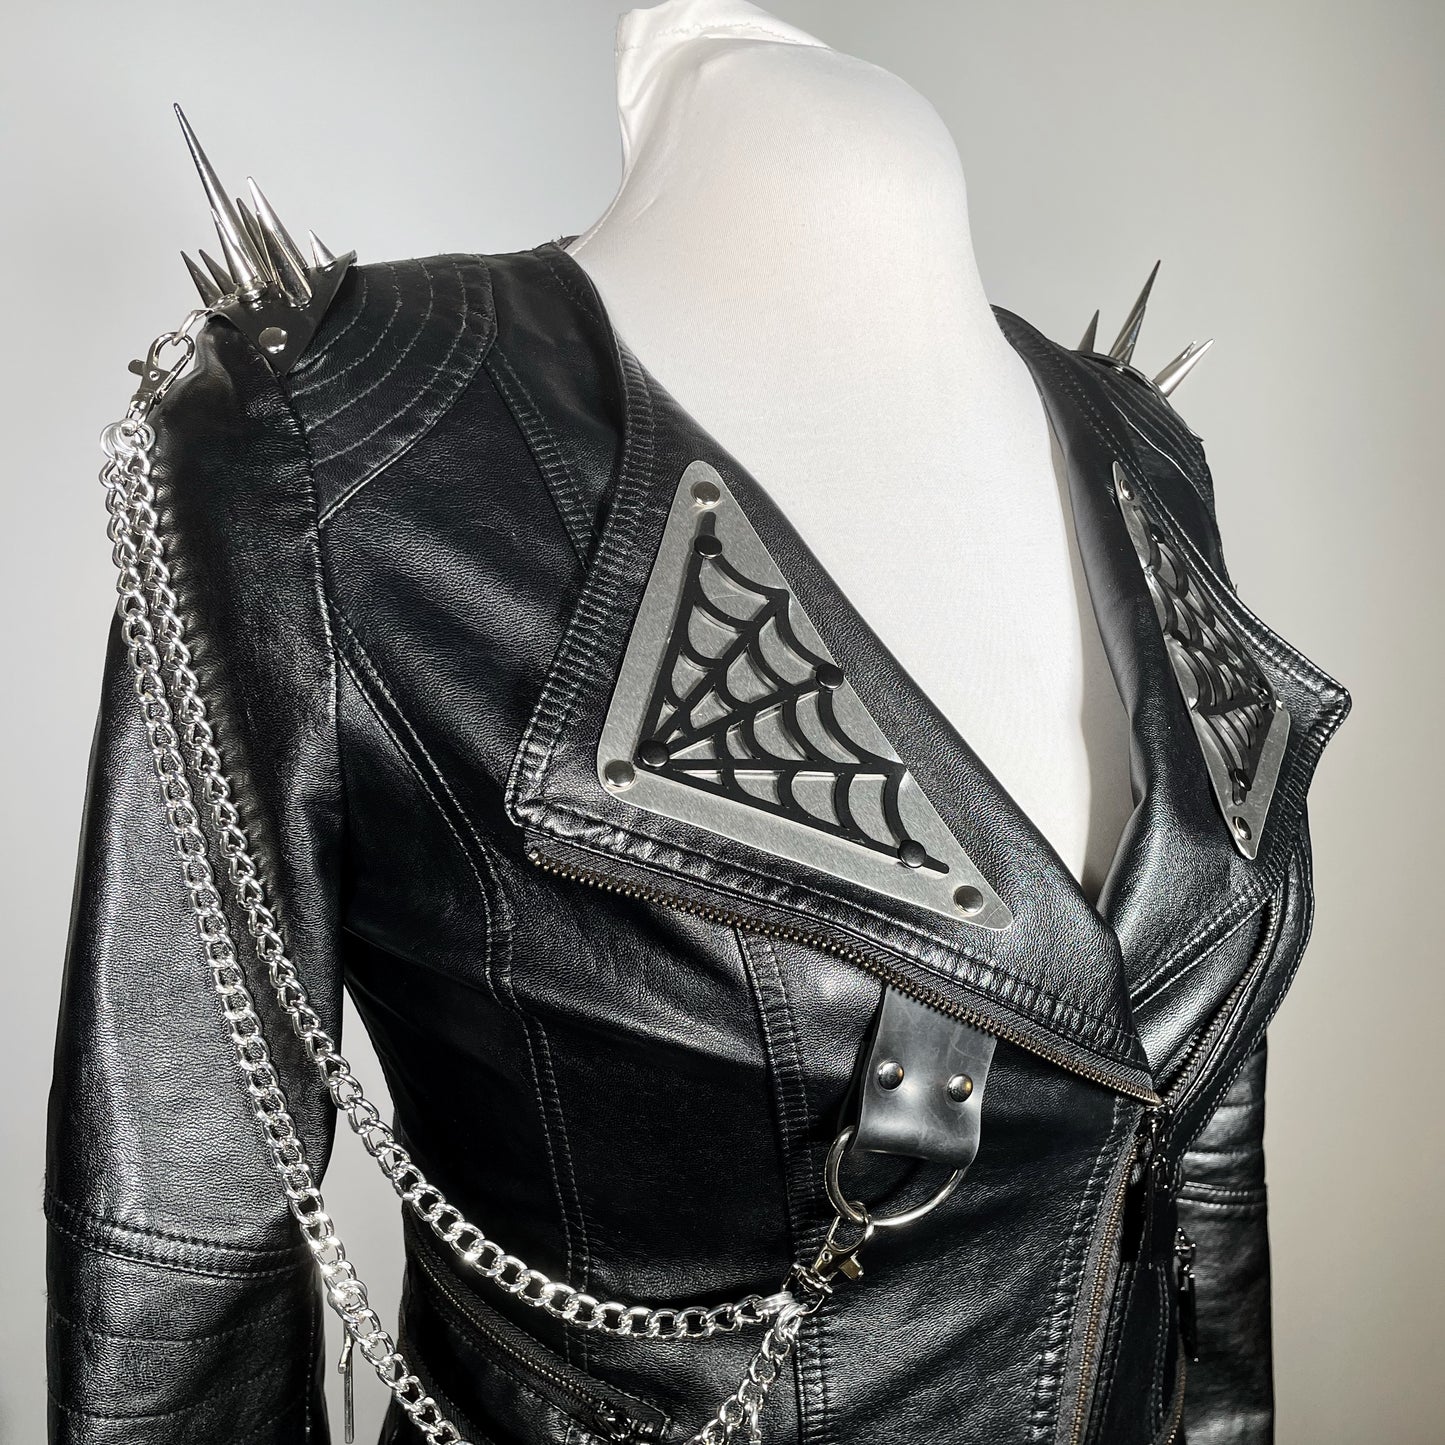 Black Pleather Moto with Metal Plating, PVC Spiderwebs, Spiked Shoulders and Chains with Crosses